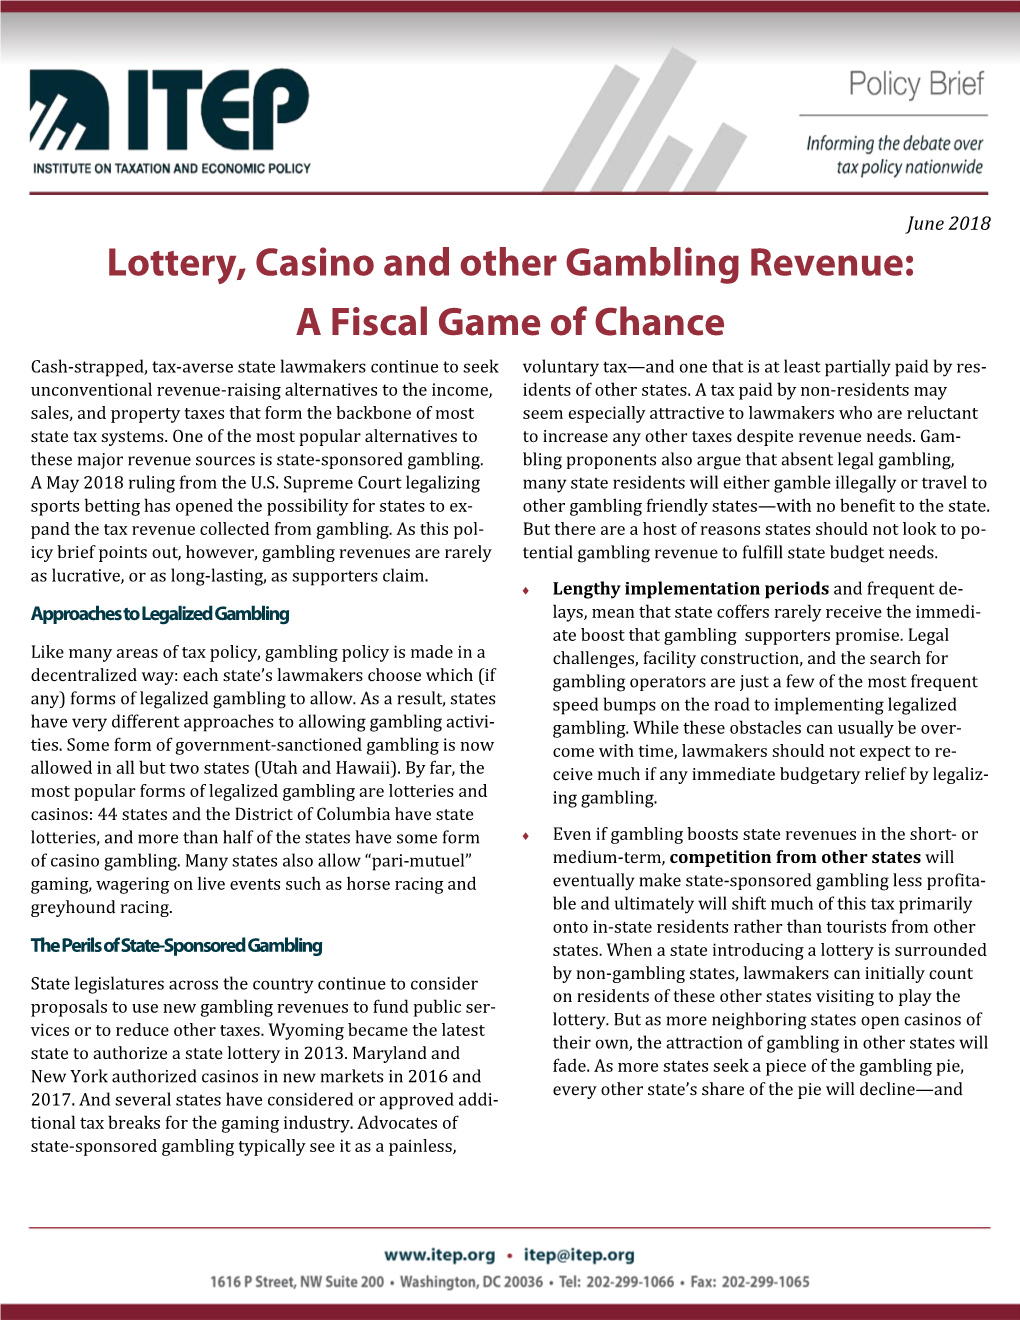 Lottery, Casino and Other Gambling Revenue: a Fiscal Game of Chance